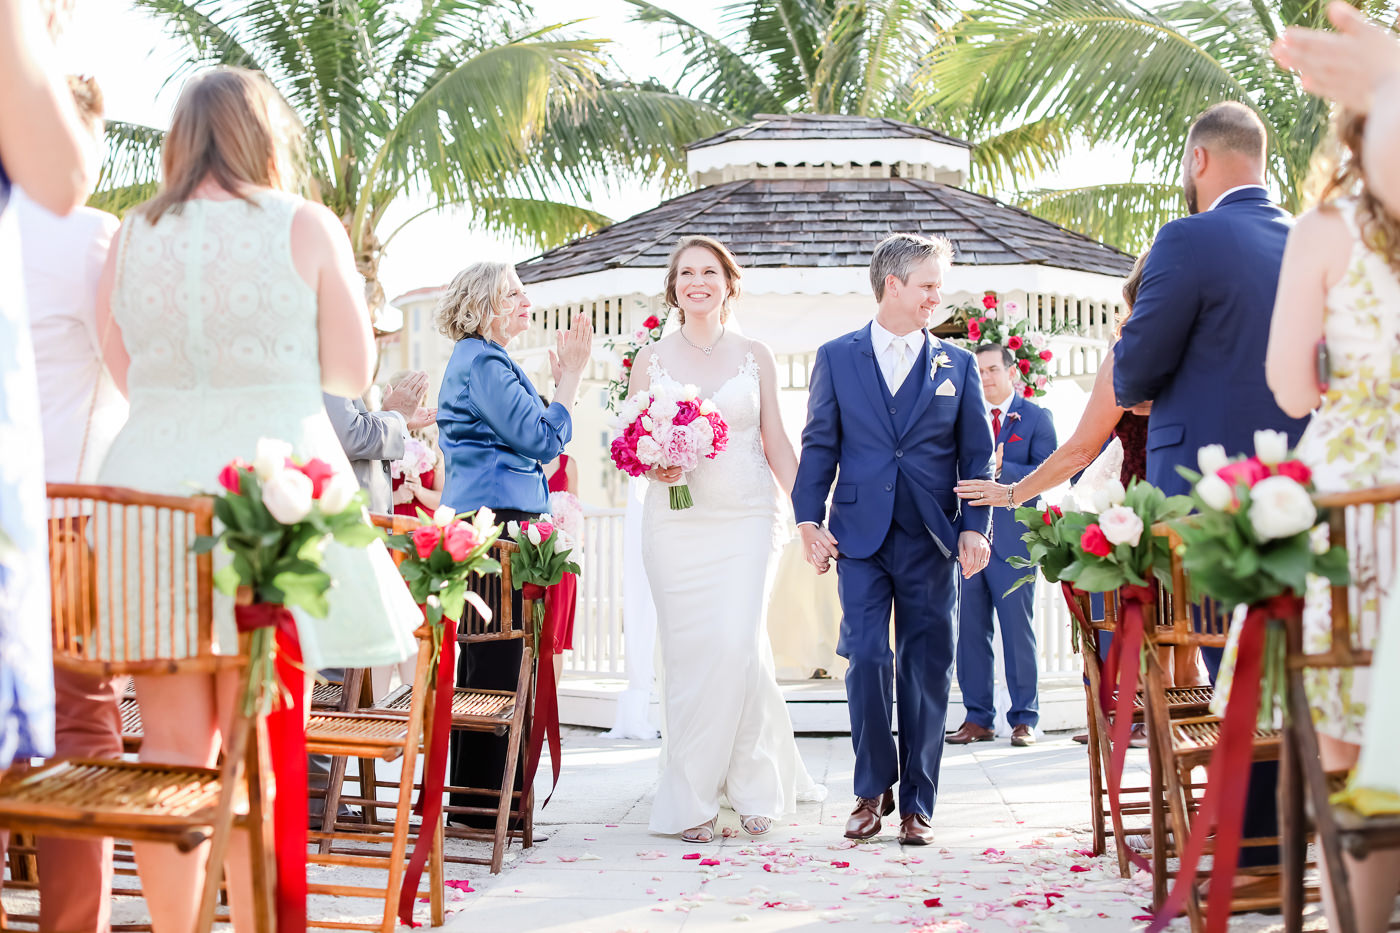 Tropical Romantic Florida Bride and Groom Recessional Wedding Ceremony Portrait | Tampa Bay Wedding Photographer Lifelong Photography Studios | St. Pete Waterfront Wedding Venue Isla Del Sol Yacht and Country Club